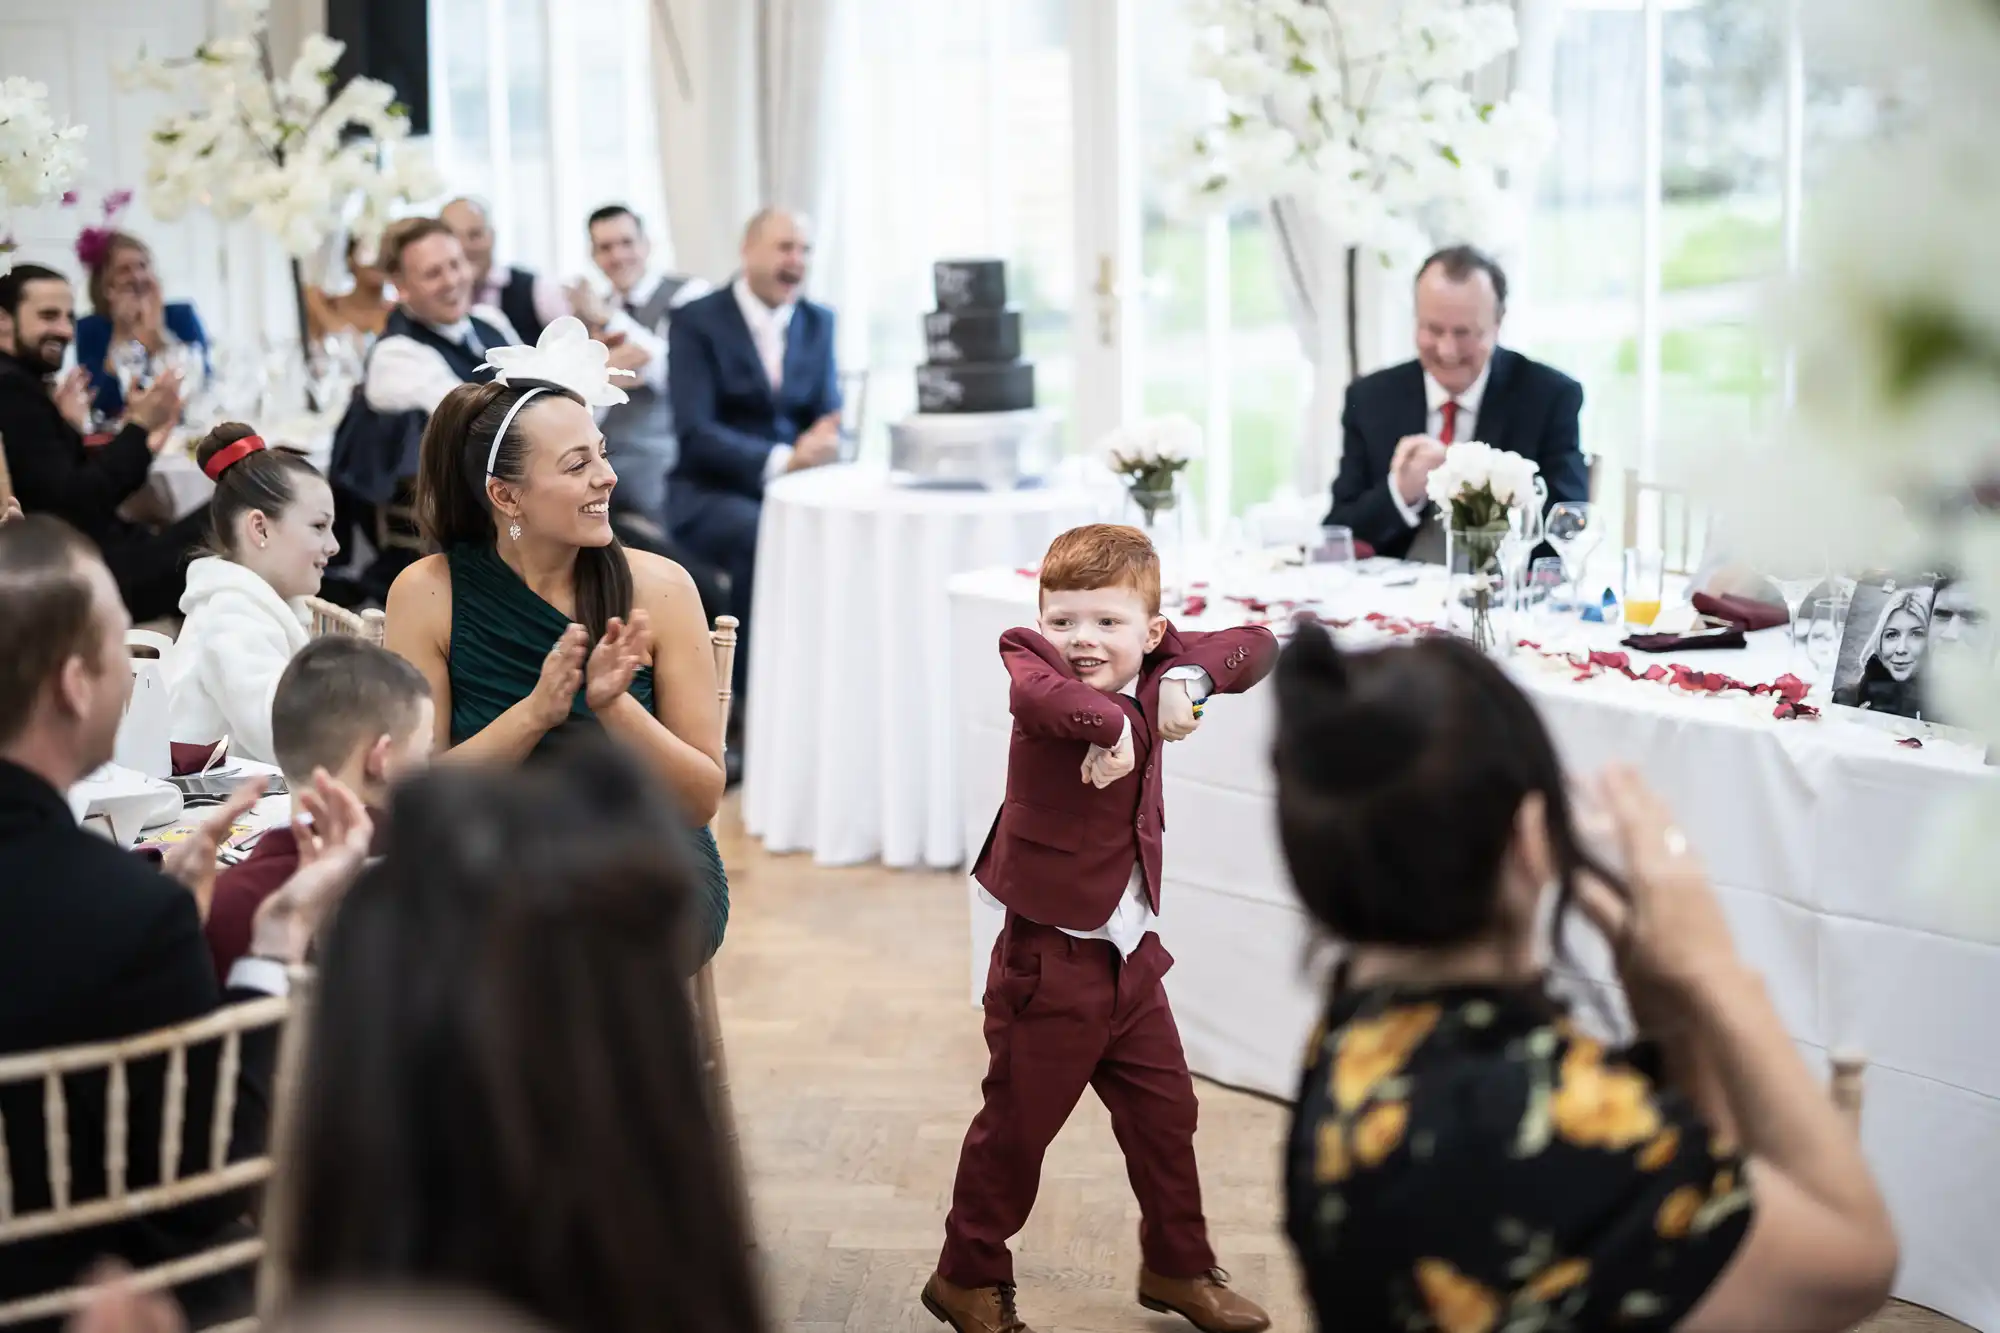 A young boy in a burgundy suit dances cheerfully in the middle of a wedding reception, while guests seated around tables clap and smile.